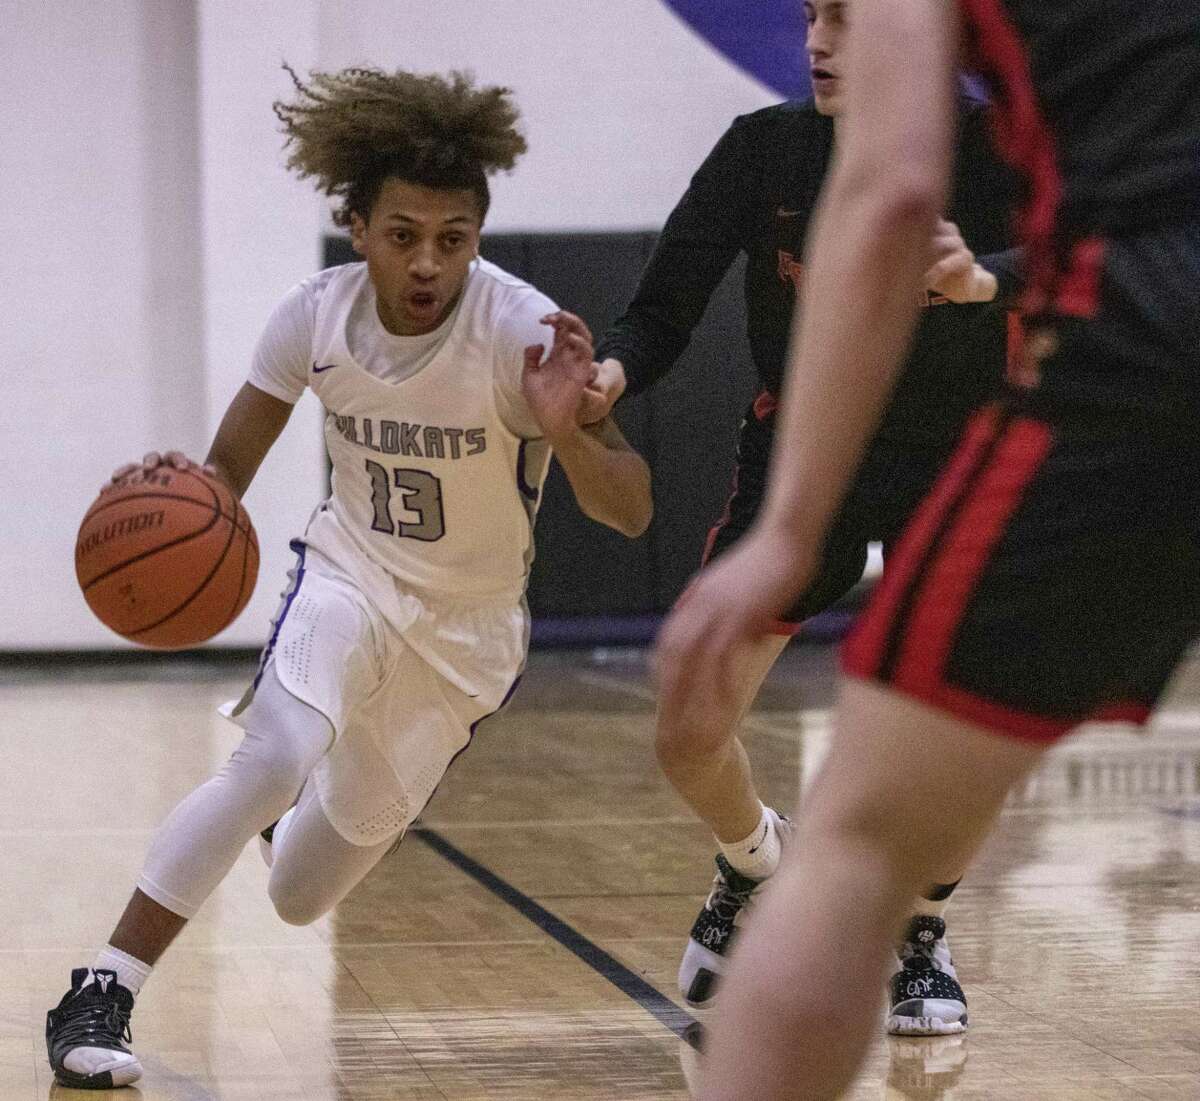 Willis senior D'shawn Woods (13) dribbles down court during a District 20-5A high school basketball game Friday, Jan.25, 2019 in Willis.